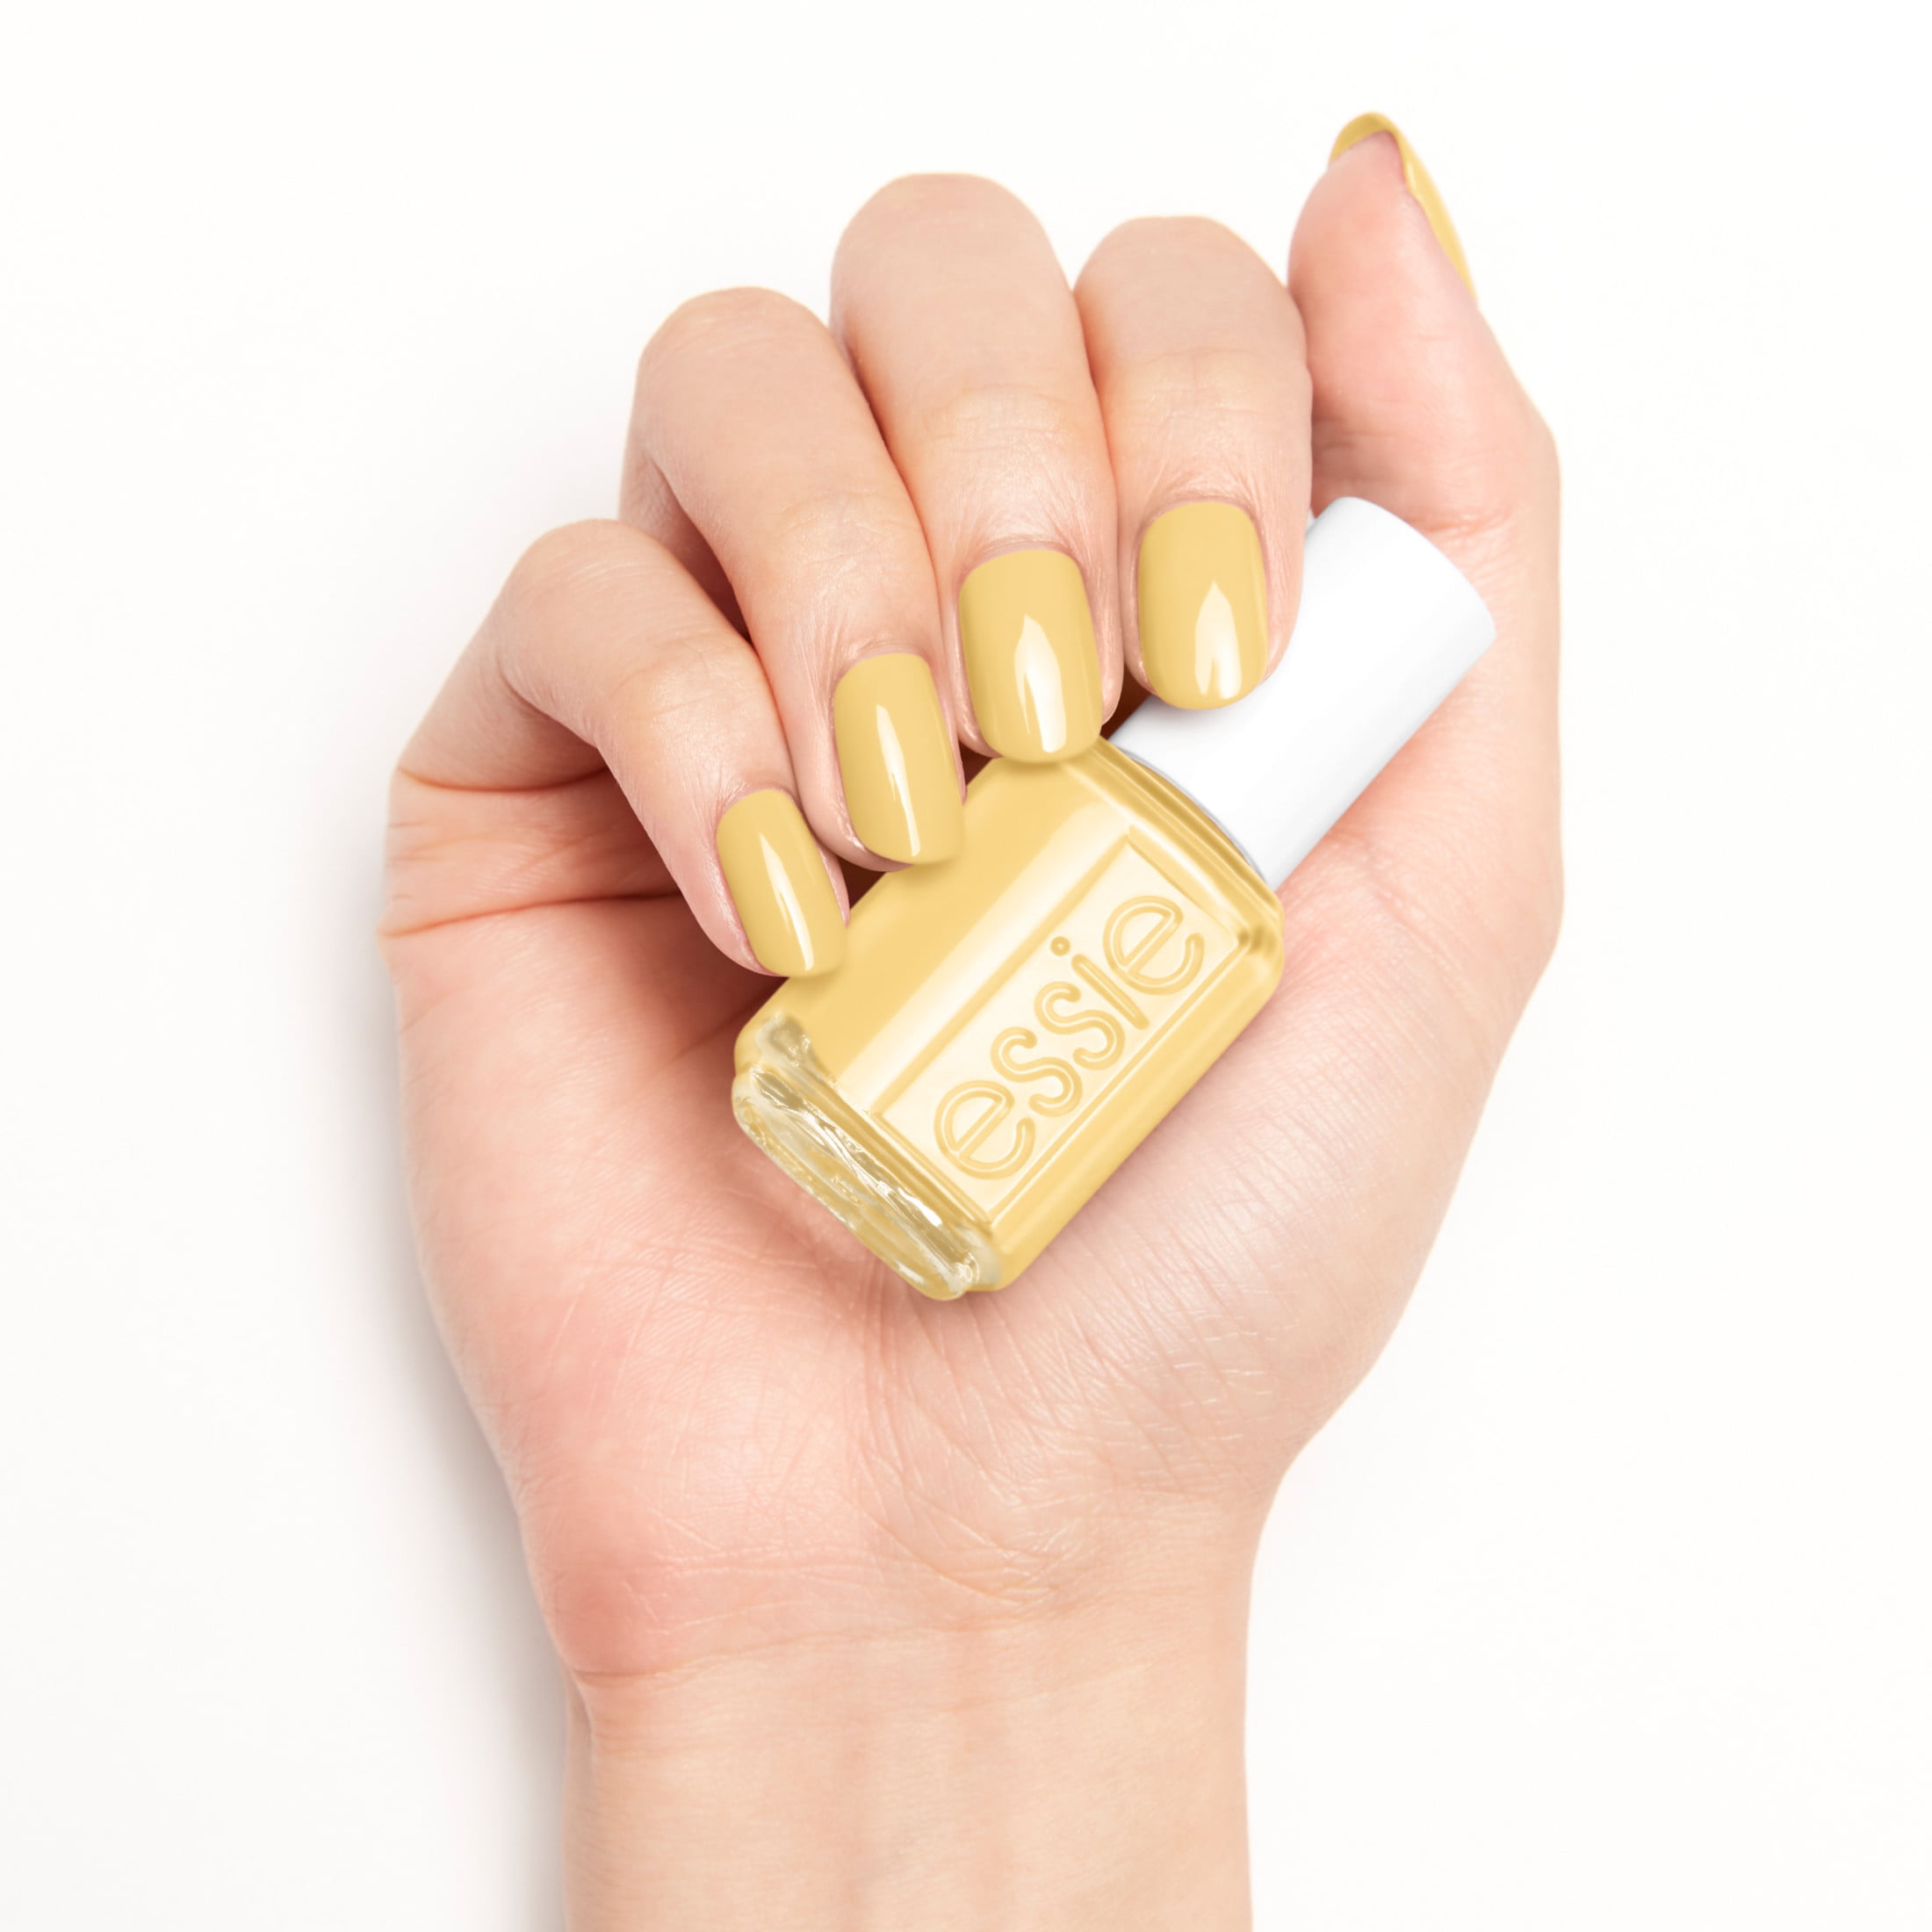 Essie What's Gold Is New | Nail designs, Nail colors, Nail polish designs